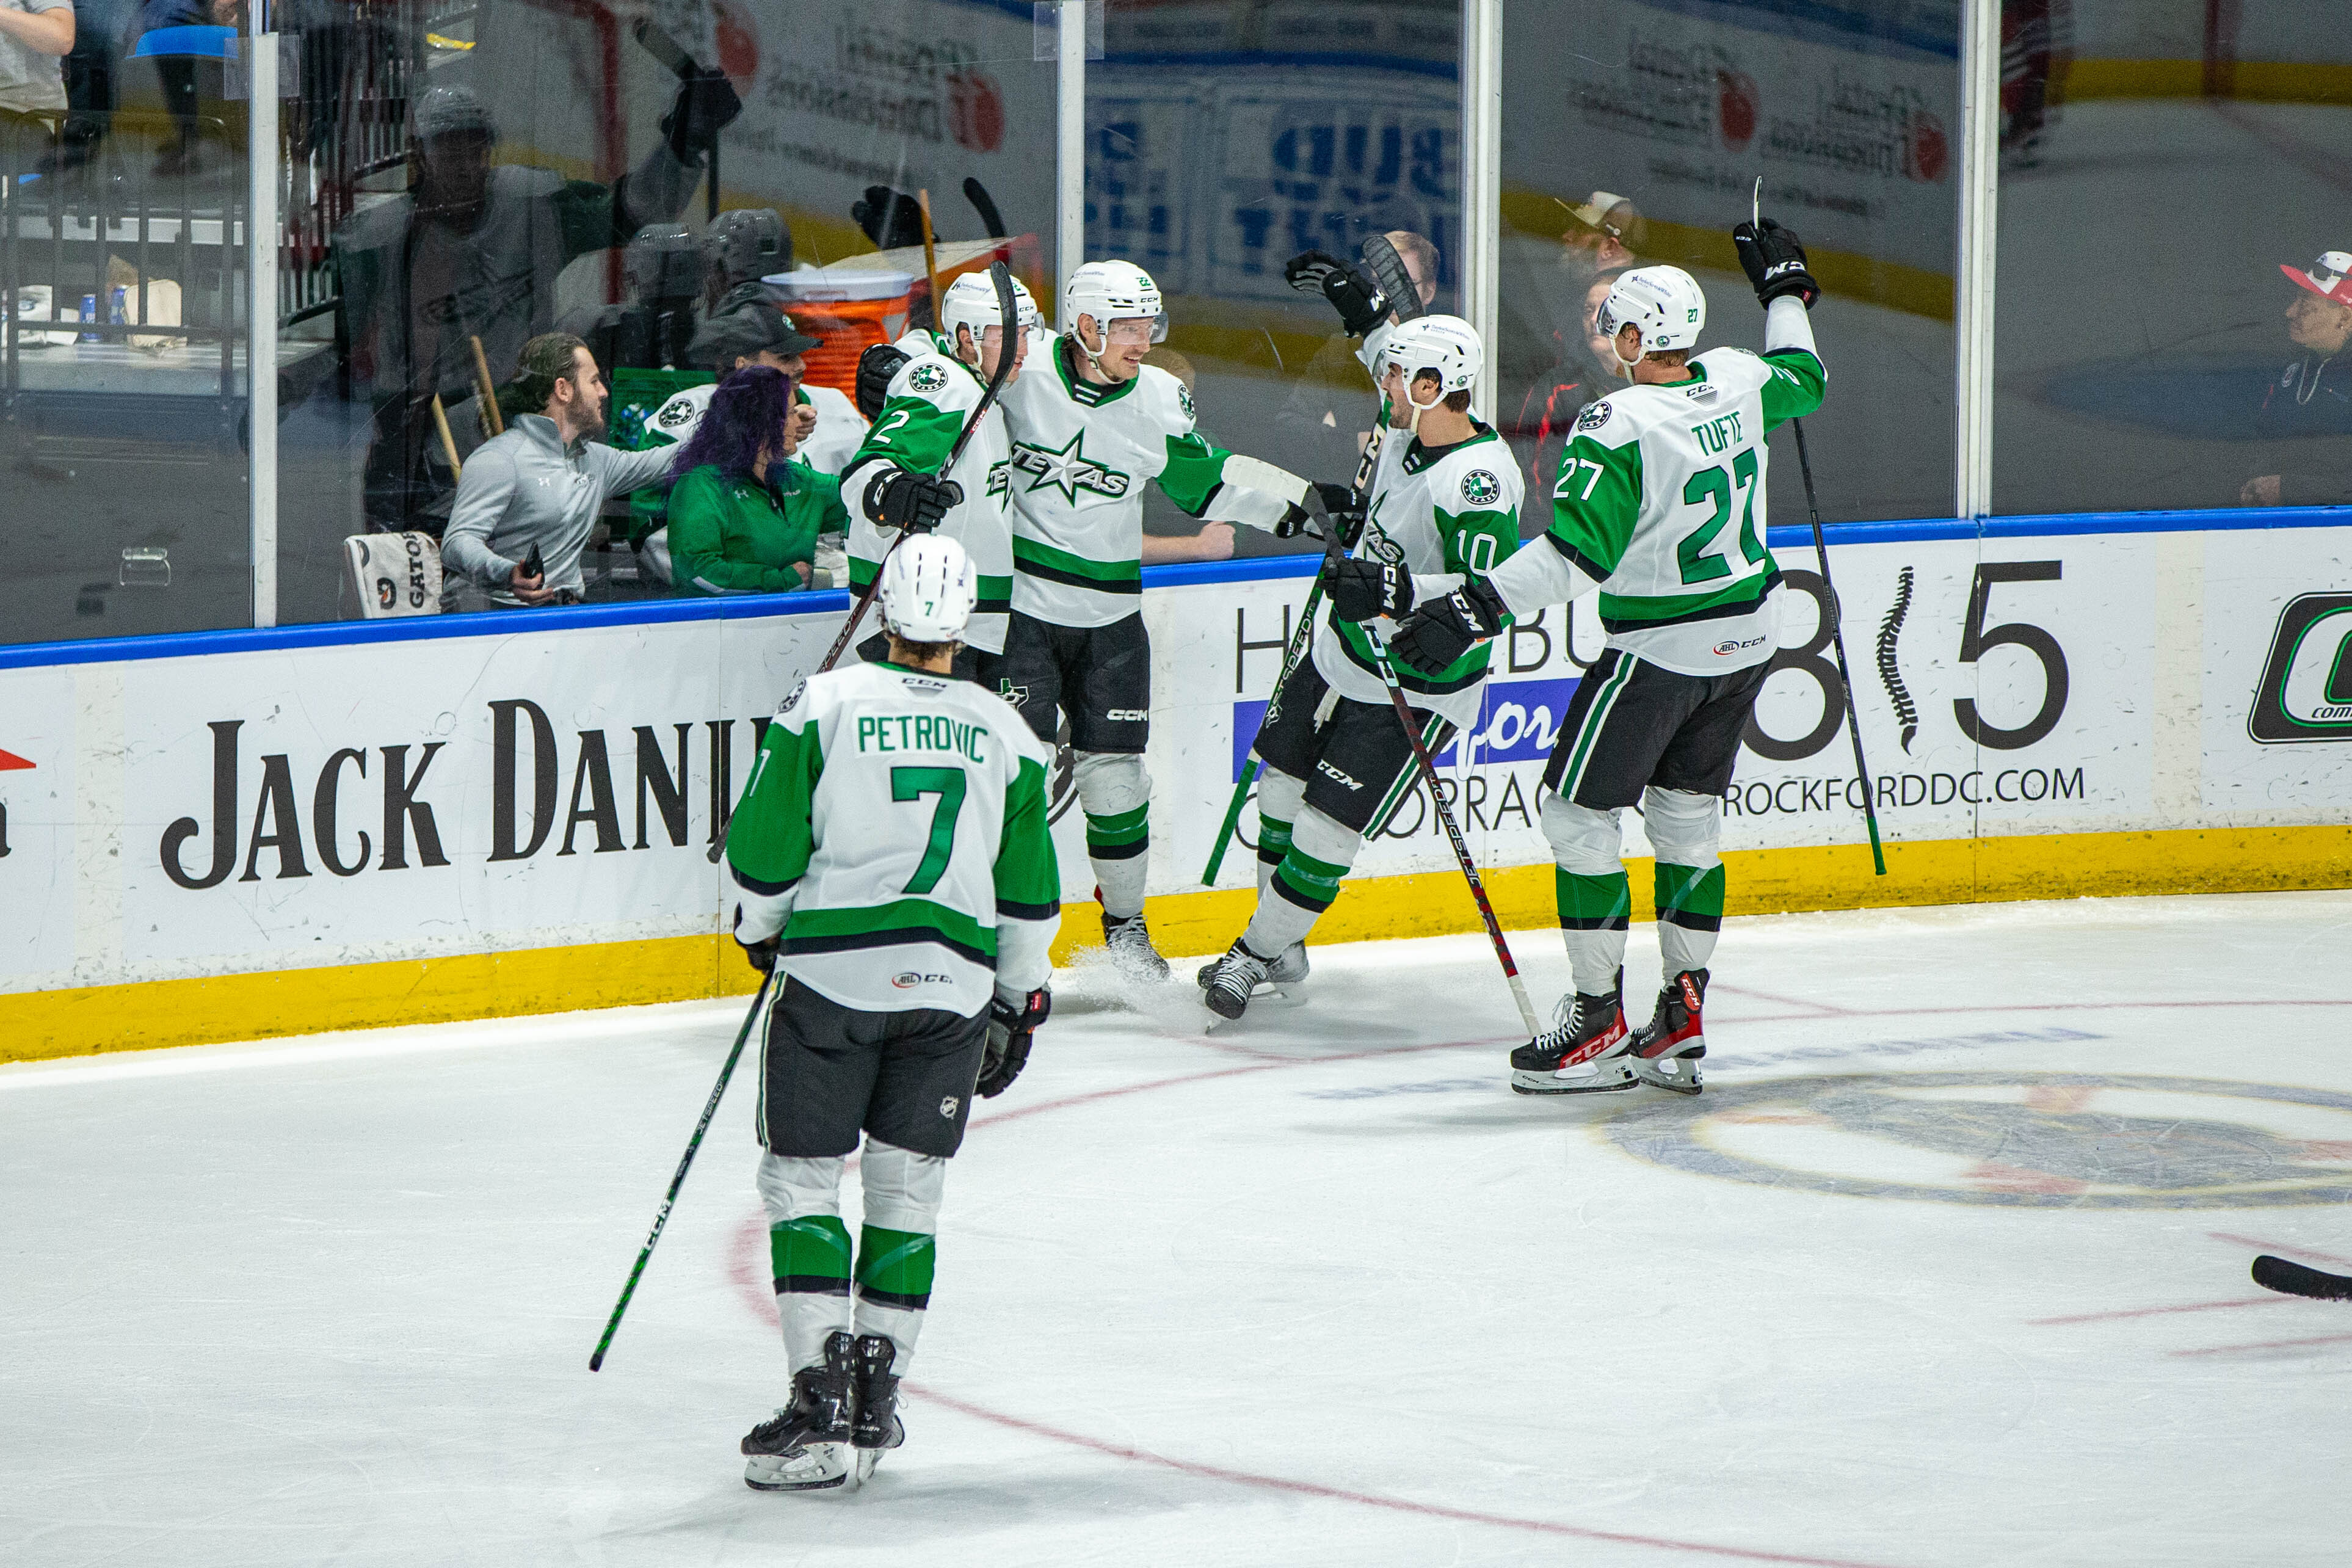 Texas Meets Rockford in Central Division Semifinals, Texas Stars